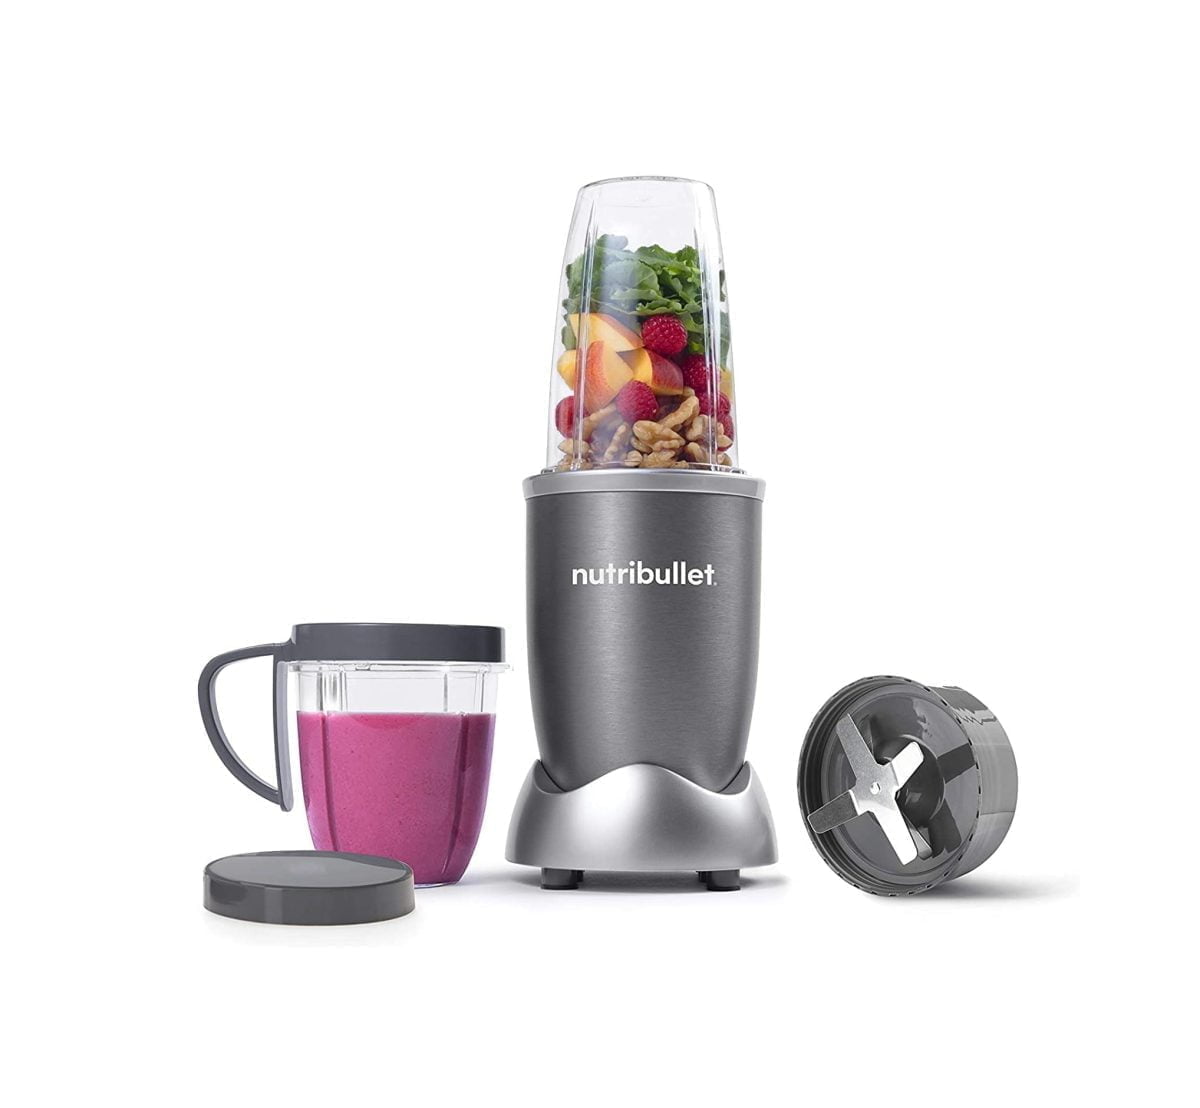 Nutribullet &Amp;Lt;Ul Class=&Amp;Quot;A-Unordered-List A-Vertical A-Spacing-Mini&Amp;Quot;&Amp;Gt; &Amp;Lt;Li&Amp;Gt;&Amp;Lt;Span Class=&Amp;Quot;A-List-Item&Amp;Quot;&Amp;Gt;Meet The Most Popular Nutribullet, Our Compact-Yet-Powerful Personal Blender. You Choose What Goes In To Get The Most Out Of Every Ingredient, Every Day.&Amp;Lt;/Span&Amp;Gt;&Amp;Lt;/Li&Amp;Gt; &Amp;Lt;Li&Amp;Gt;&Amp;Lt;Span Class=&Amp;Quot;A-List-Item&Amp;Quot;&Amp;Gt;The Nutribullet Is The Fastest, Easiest Solution For Making Nutrient-Packed Smoothies. Load It Up With Your Favorite Whole Foods Like Nuts, Berries, And Spinach, Then Push, Twist, And Blend Your Way To A Healthier Lifestyle.&Amp;Lt;/Span&Amp;Gt;&Amp;Lt;/Li&Amp;Gt; &Amp;Lt;Li&Amp;Gt;&Amp;Lt;Span Class=&Amp;Quot;A-List-Item&Amp;Quot;&Amp;Gt;Powerful 600-Watt Motor And Refined Nutrient-Extraction Blades Blend Whole Foods Into Liquid Fuel For Your Body - In Seconds.&Amp;Lt;/Span&Amp;Gt;&Amp;Lt;/Li&Amp;Gt; &Amp;Lt;Li&Amp;Gt;&Amp;Lt;Span Class=&Amp;Quot;A-List-Item&Amp;Quot;&Amp;Gt;Hassle-Free Cleaning - Simply Twist Off The Blade, Rinse With Soap And Water, And Put The Cups In The Top Rack Of The Dishwasher.&Amp;Lt;/Span&Amp;Gt;&Amp;Lt;/Li&Amp;Gt; &Amp;Lt;Li&Amp;Gt;&Amp;Lt;Span Class=&Amp;Quot;A-List-Item&Amp;Quot;&Amp;Gt;What You Get: (1) 600 Watt Motor Base, (1) Extractor Blade, (1) 700Ml Cup, (1) 500Ml Cup, (1) Lip Ring With Handle, (1) Solid Lid, (1) User Guide, (1) Recipe Book. 2 Years Brand Warranty&Amp;Lt;/Span&Amp;Gt;&Amp;Lt;/Li&Amp;Gt; &Amp;Lt;/Ul&Amp;Gt; Nutribullet Nutribullet 600 Watts, 8 Piece Set, Multi-Function High Speed Blender, Mixer System With Nutrient Extractor, Smoothie Maker, Gray